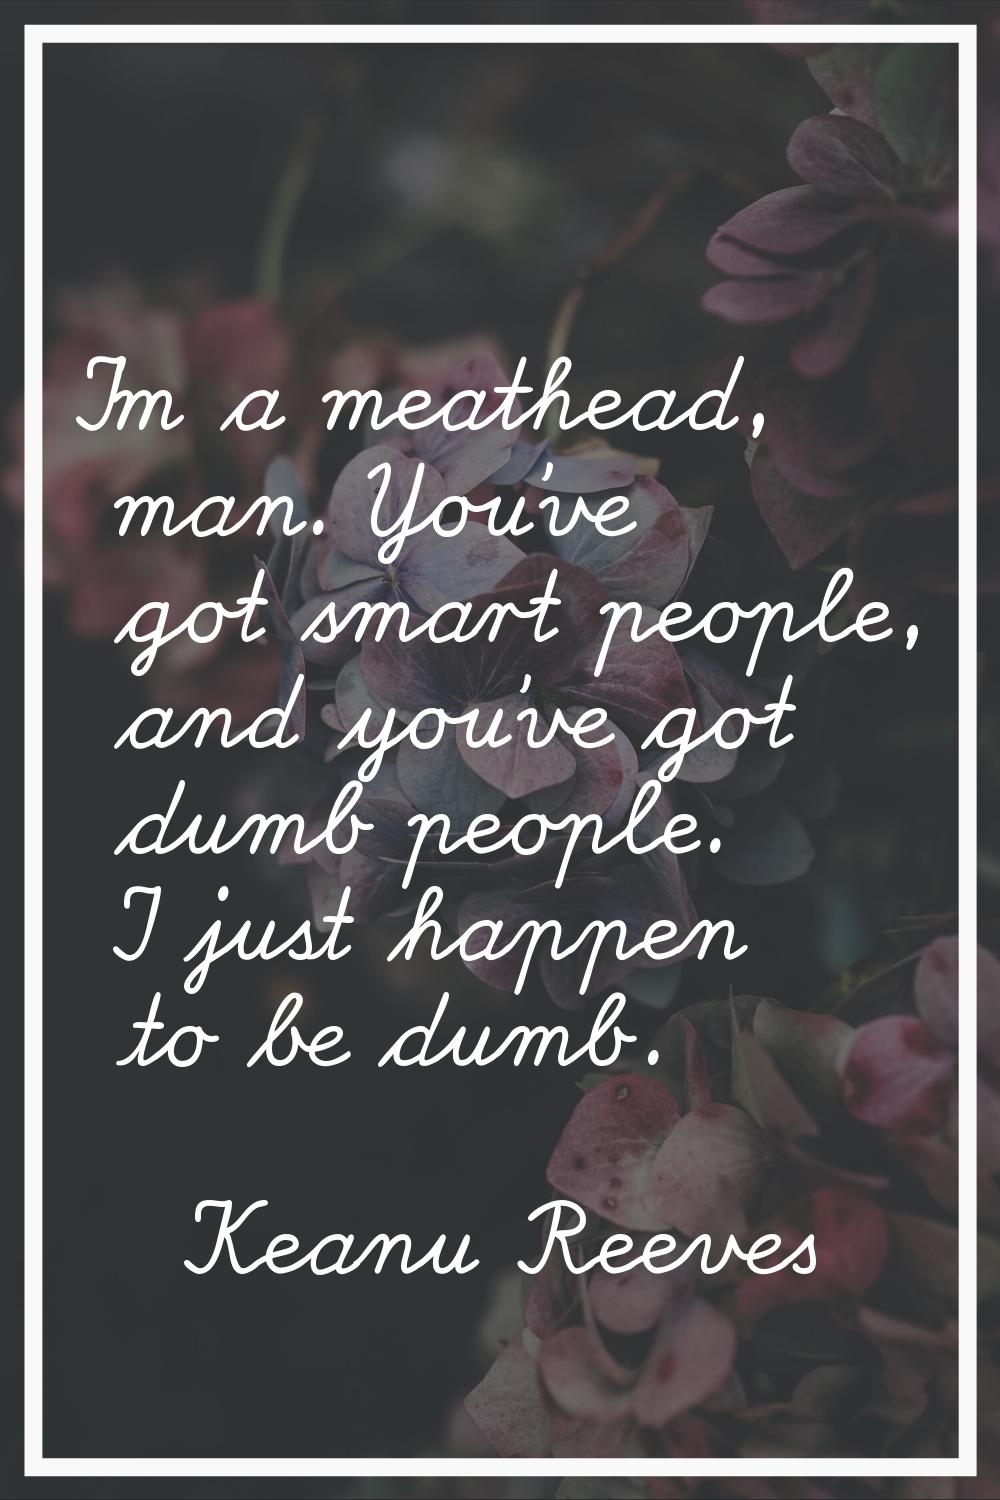 I'm a meathead, man. You've got smart people, and you've got dumb people. I just happen to be dumb.